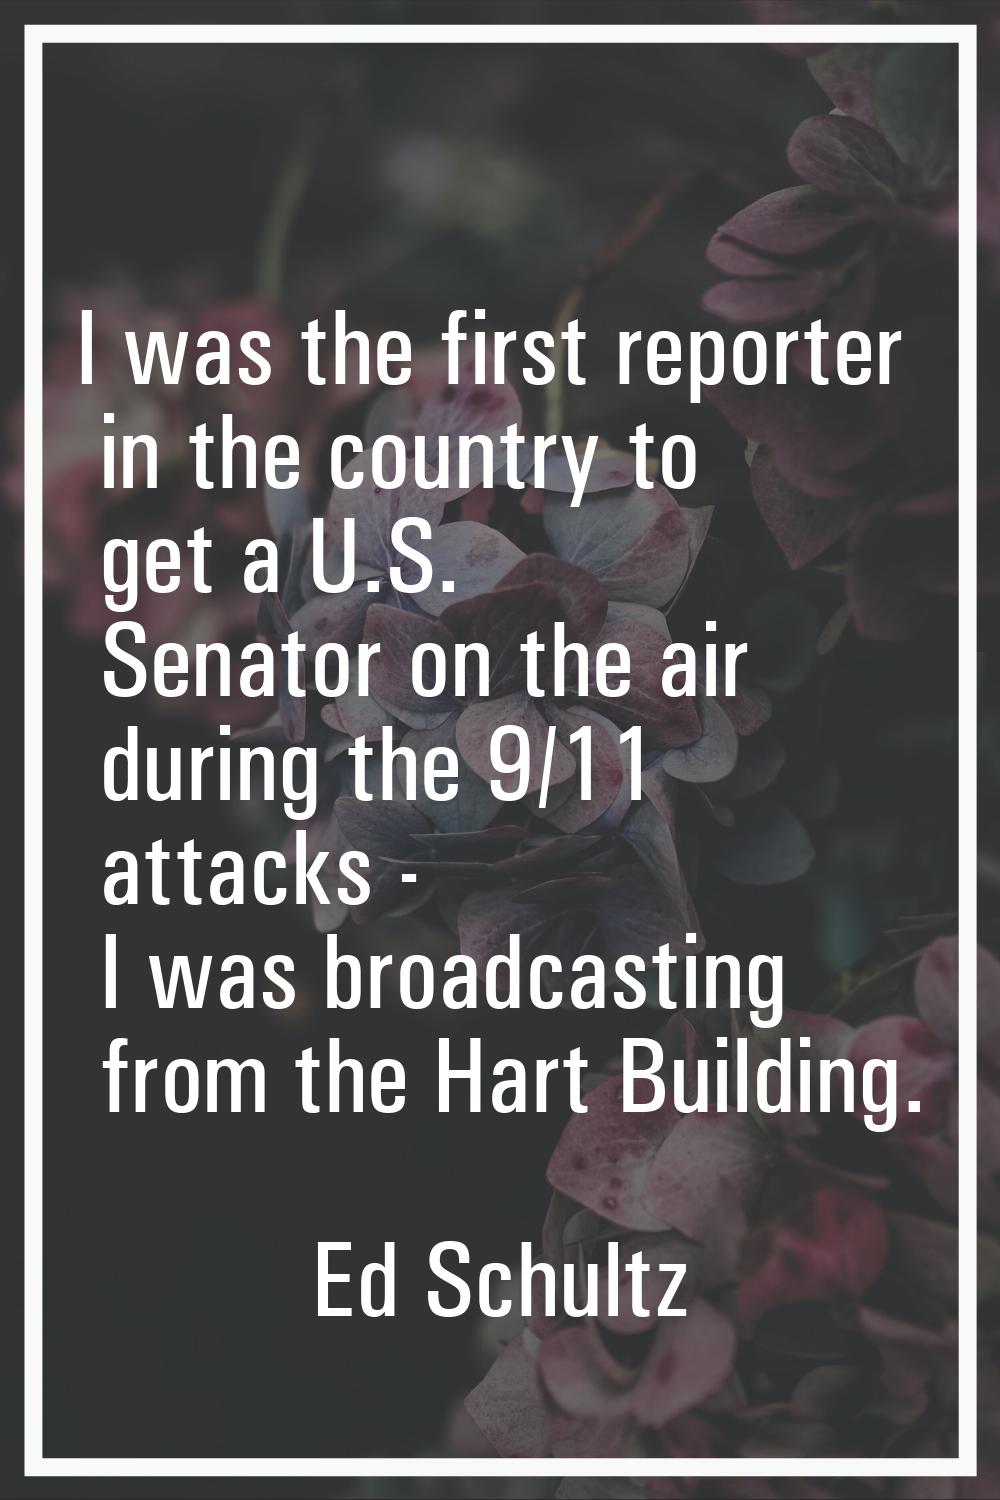 I was the first reporter in the country to get a U.S. Senator on the air during the 9/11 attacks - 